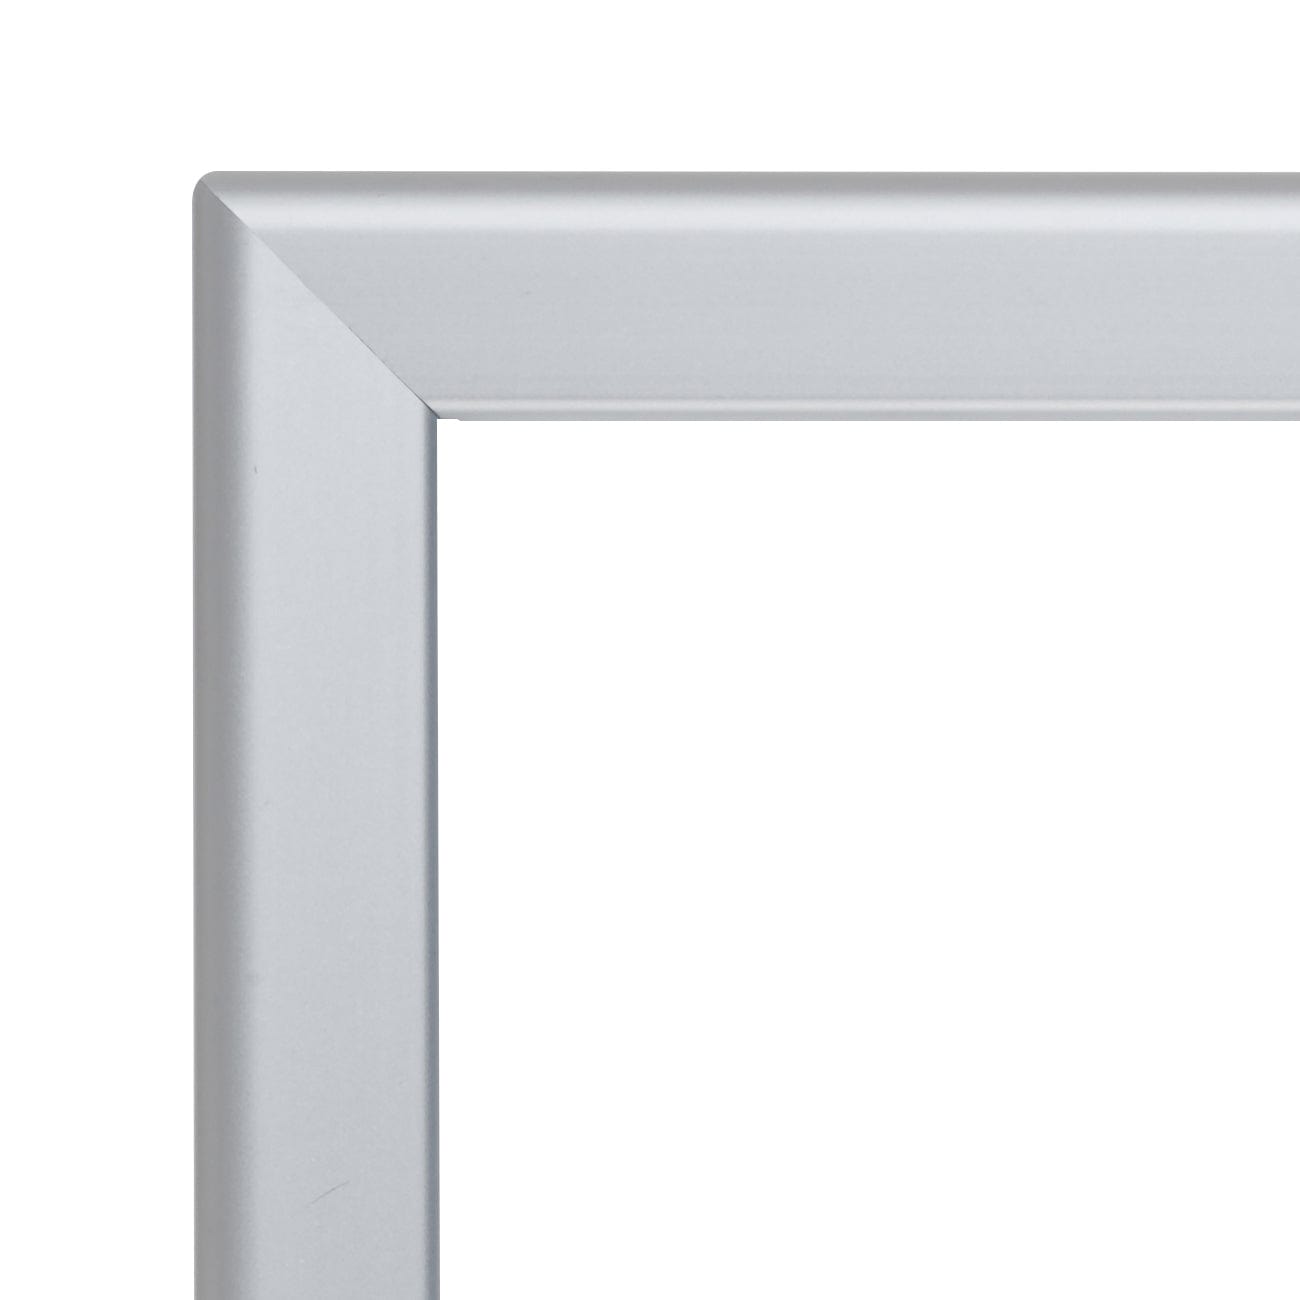 27x40 Silver SnapeZo® Poster Snap Frame 1.25" - Snap Frames Direct